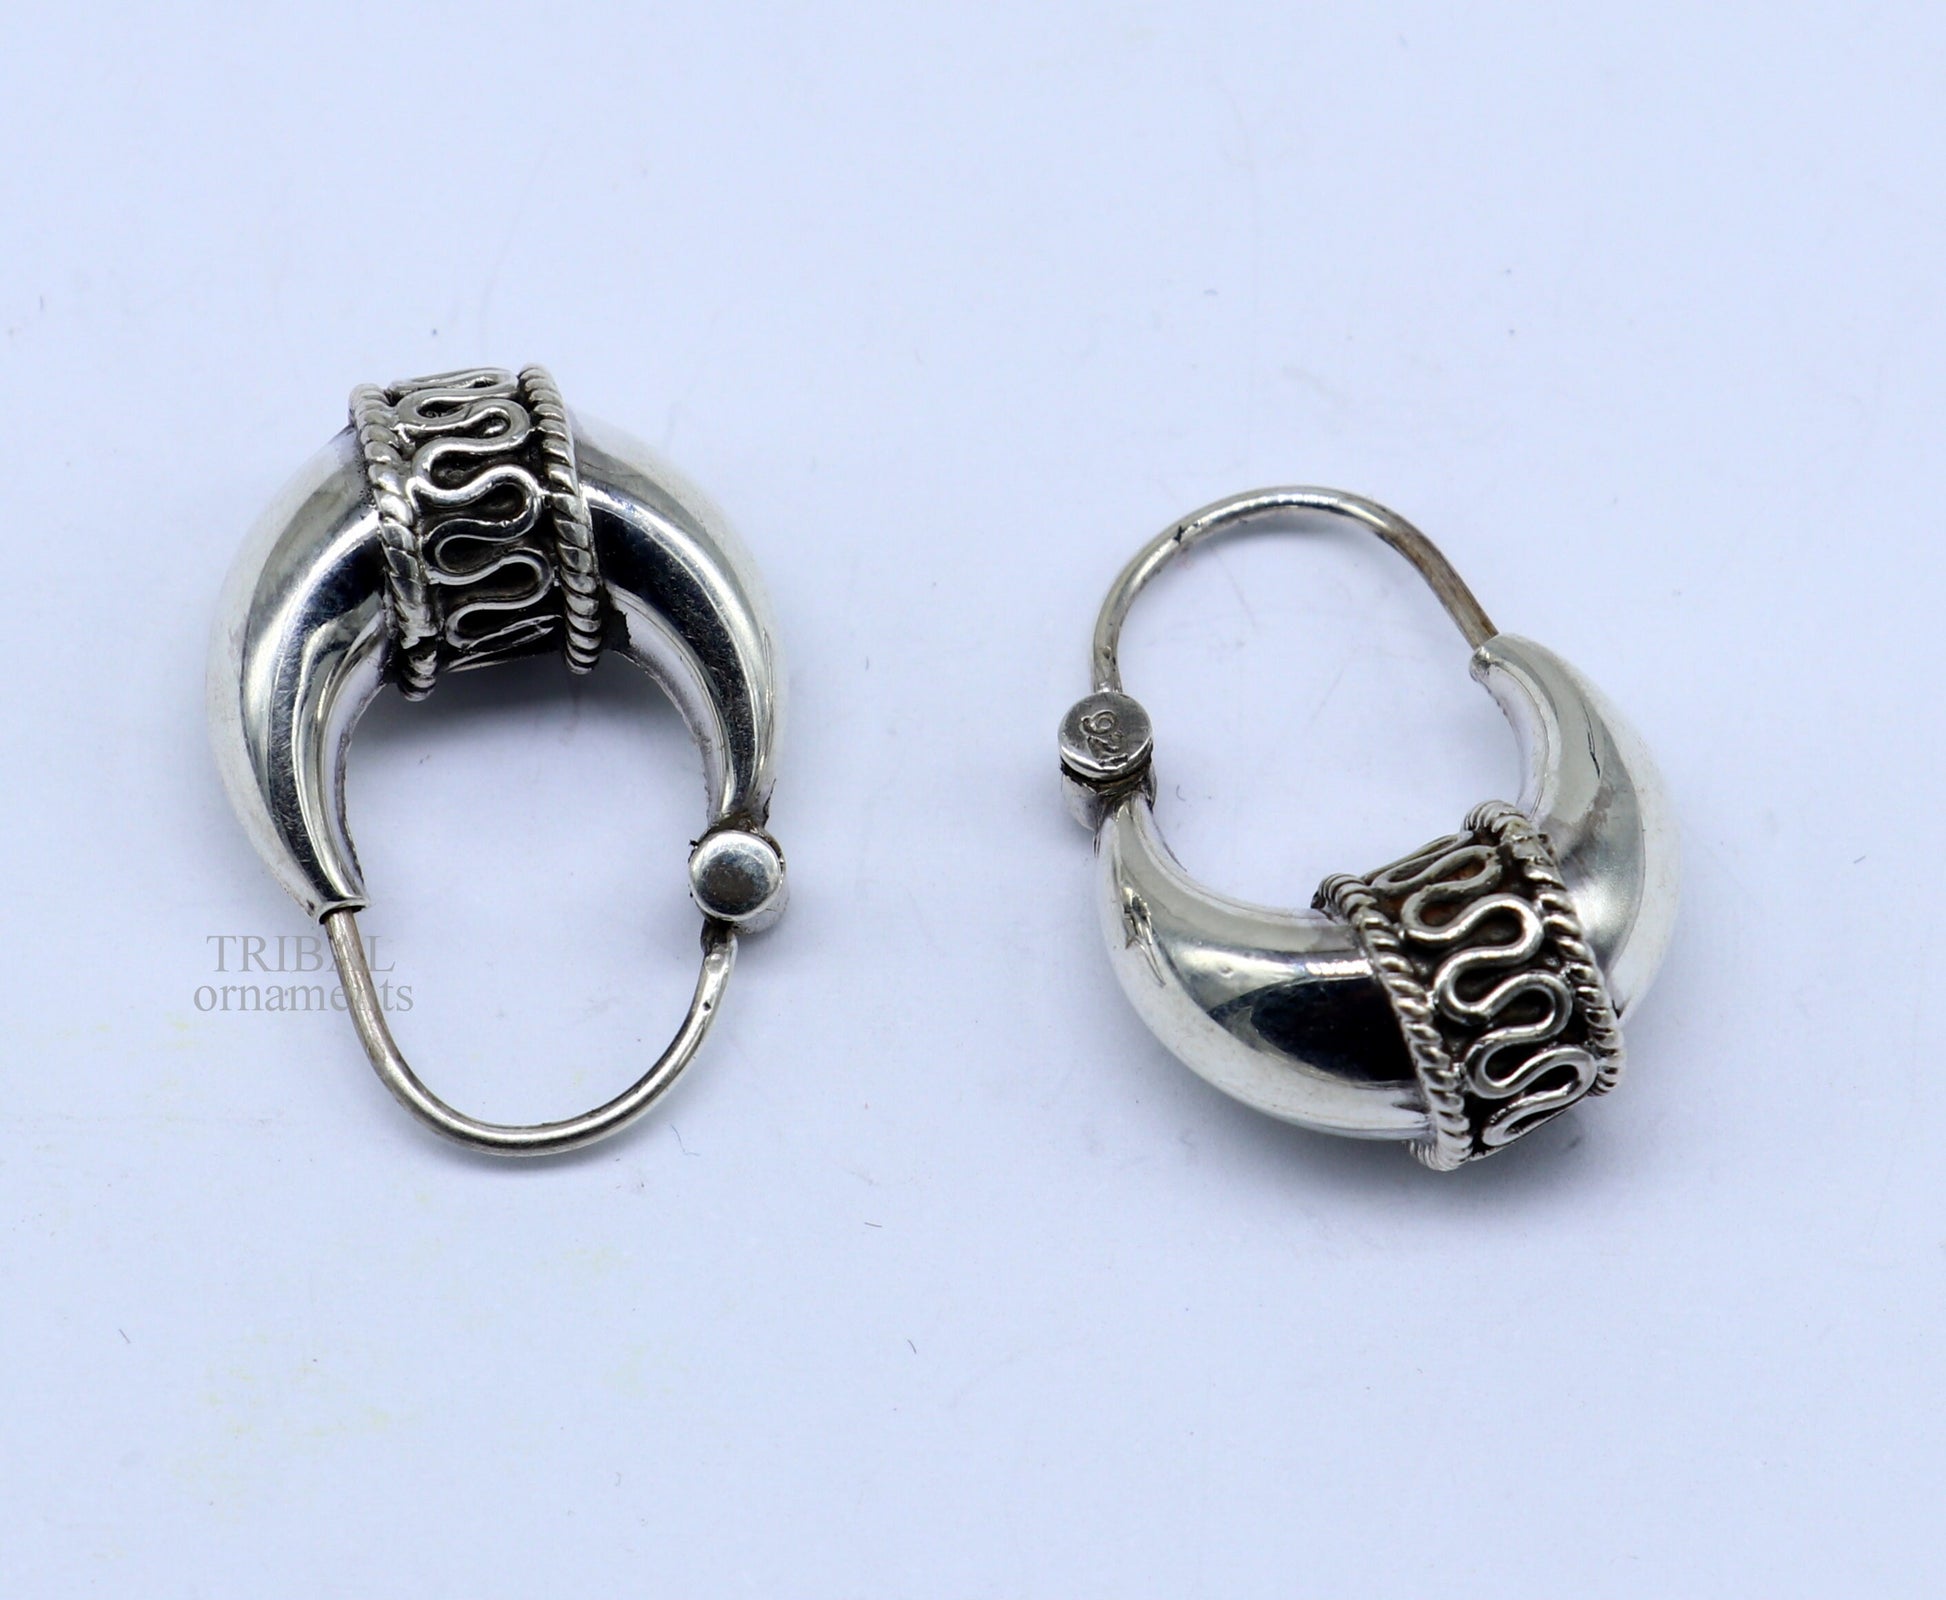 925 sterling silver Handmade vintage ethnic style hoops earrings Kundal unisex tribal stylish unique Bali jewelry from India ear1214 - TRIBAL ORNAMENTS